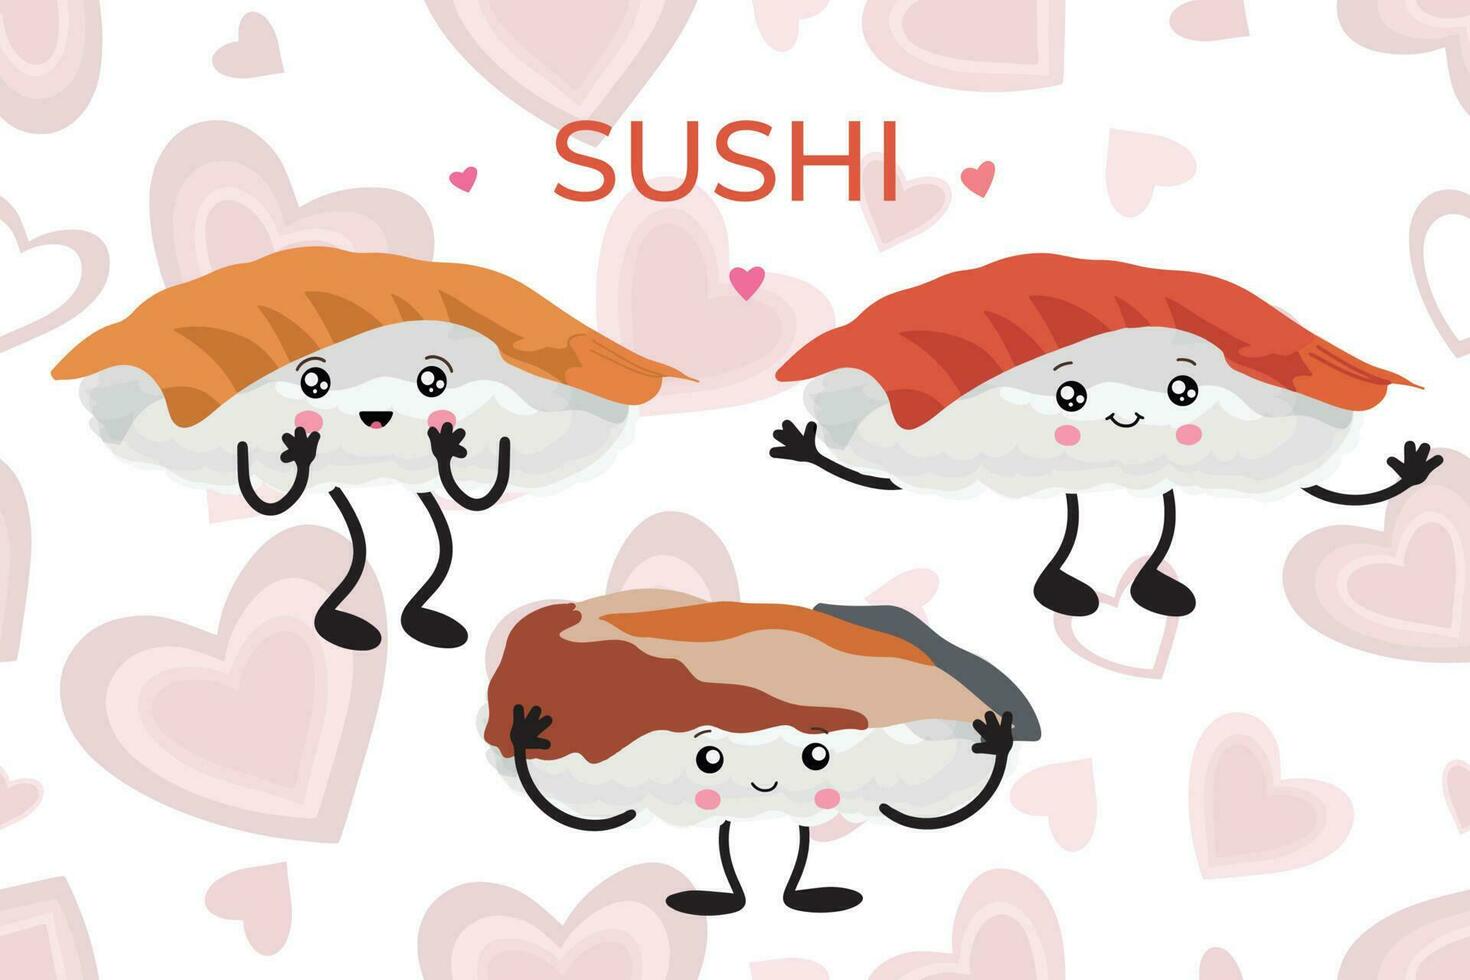 Kawaii Sushi seamless pattern. Vector background of cute sushi, rolls, sashimi with smiling face and pink cheeks in kawaii style. Japanese asian traditional food